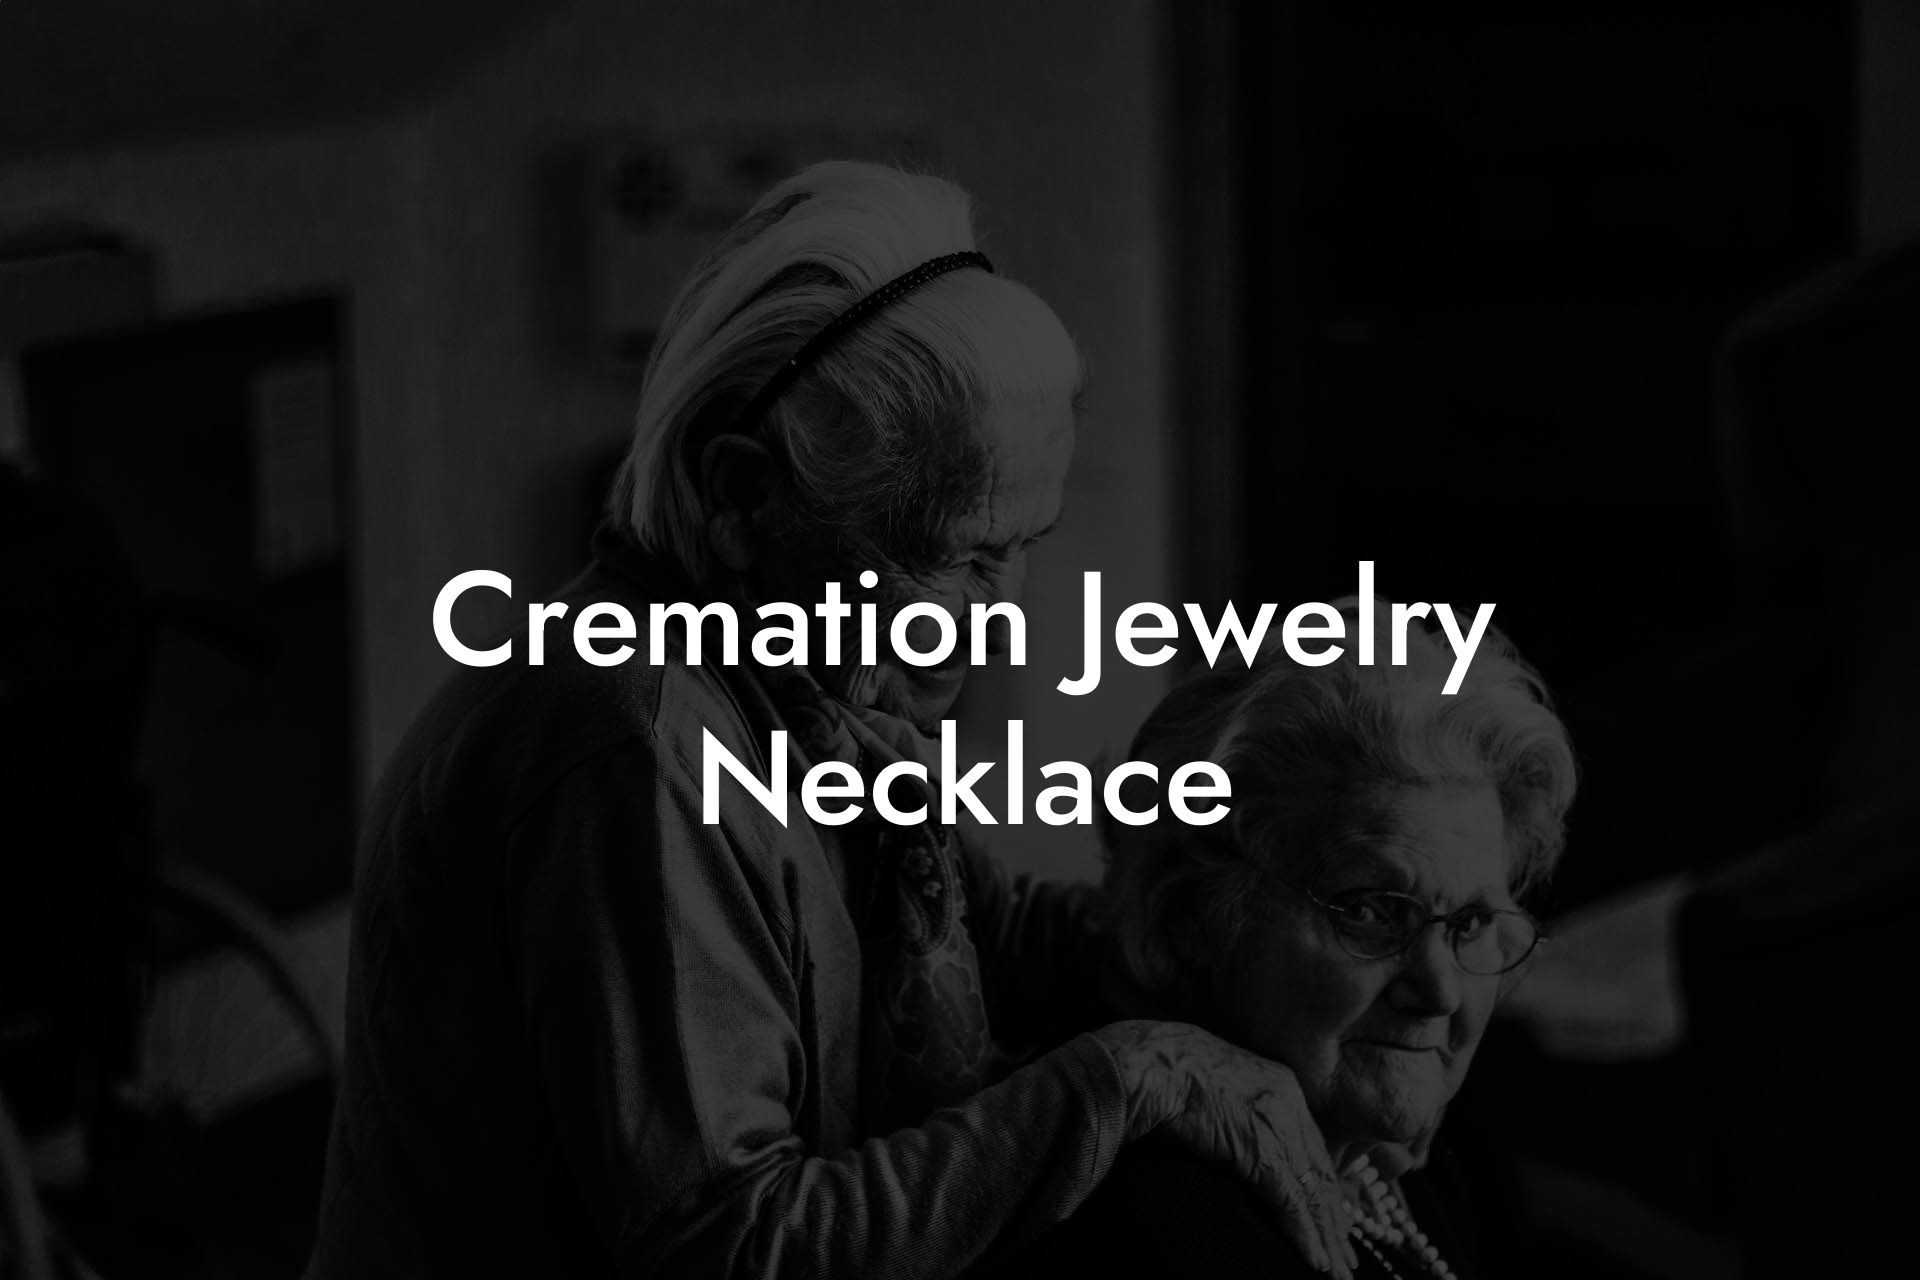 Cremation Jewelry Necklace - Eulogy Assistant